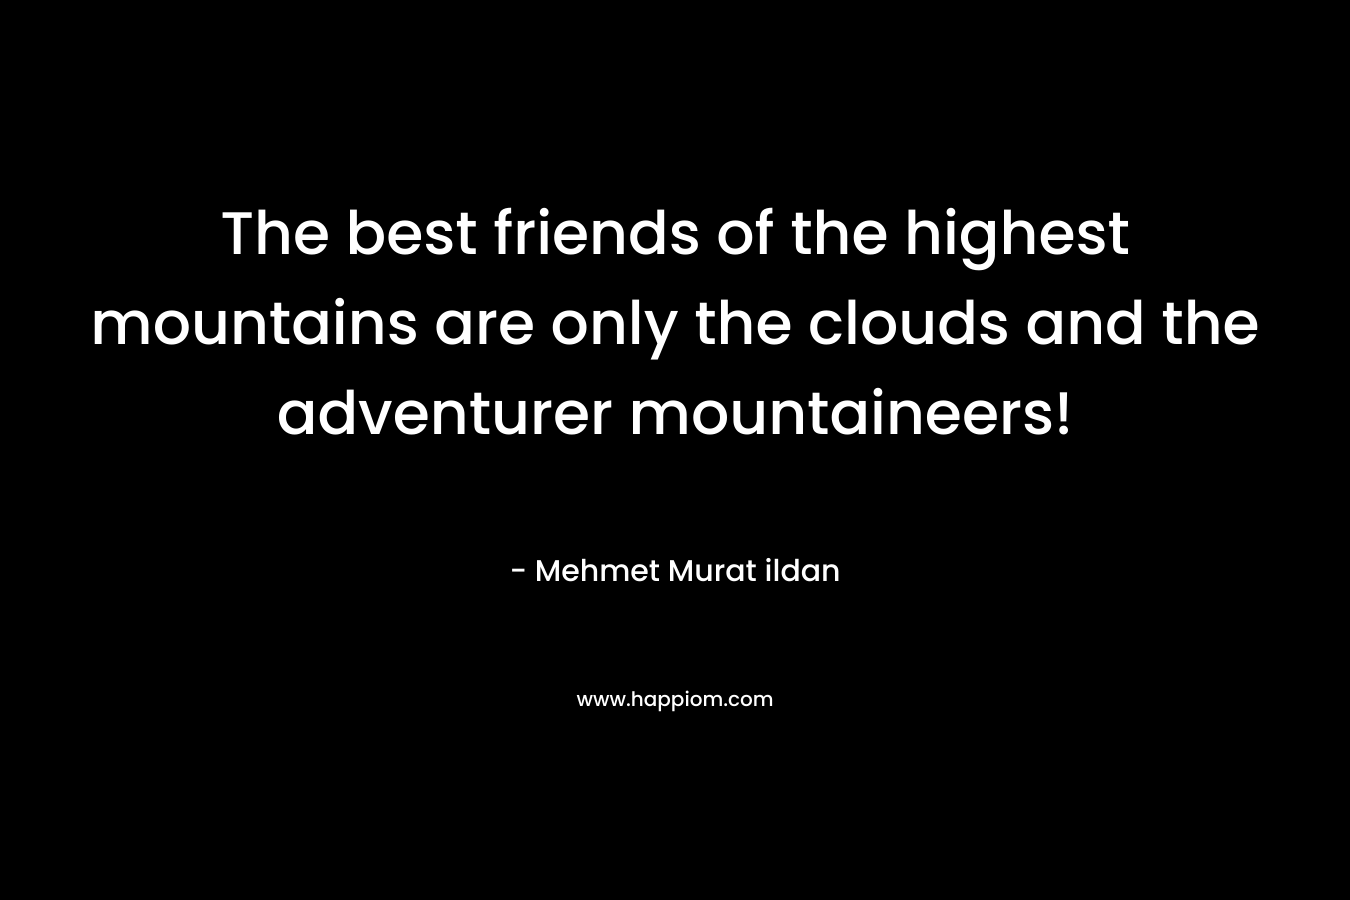 The best friends of the highest mountains are only the clouds and the adventurer mountaineers! – Mehmet Murat ildan